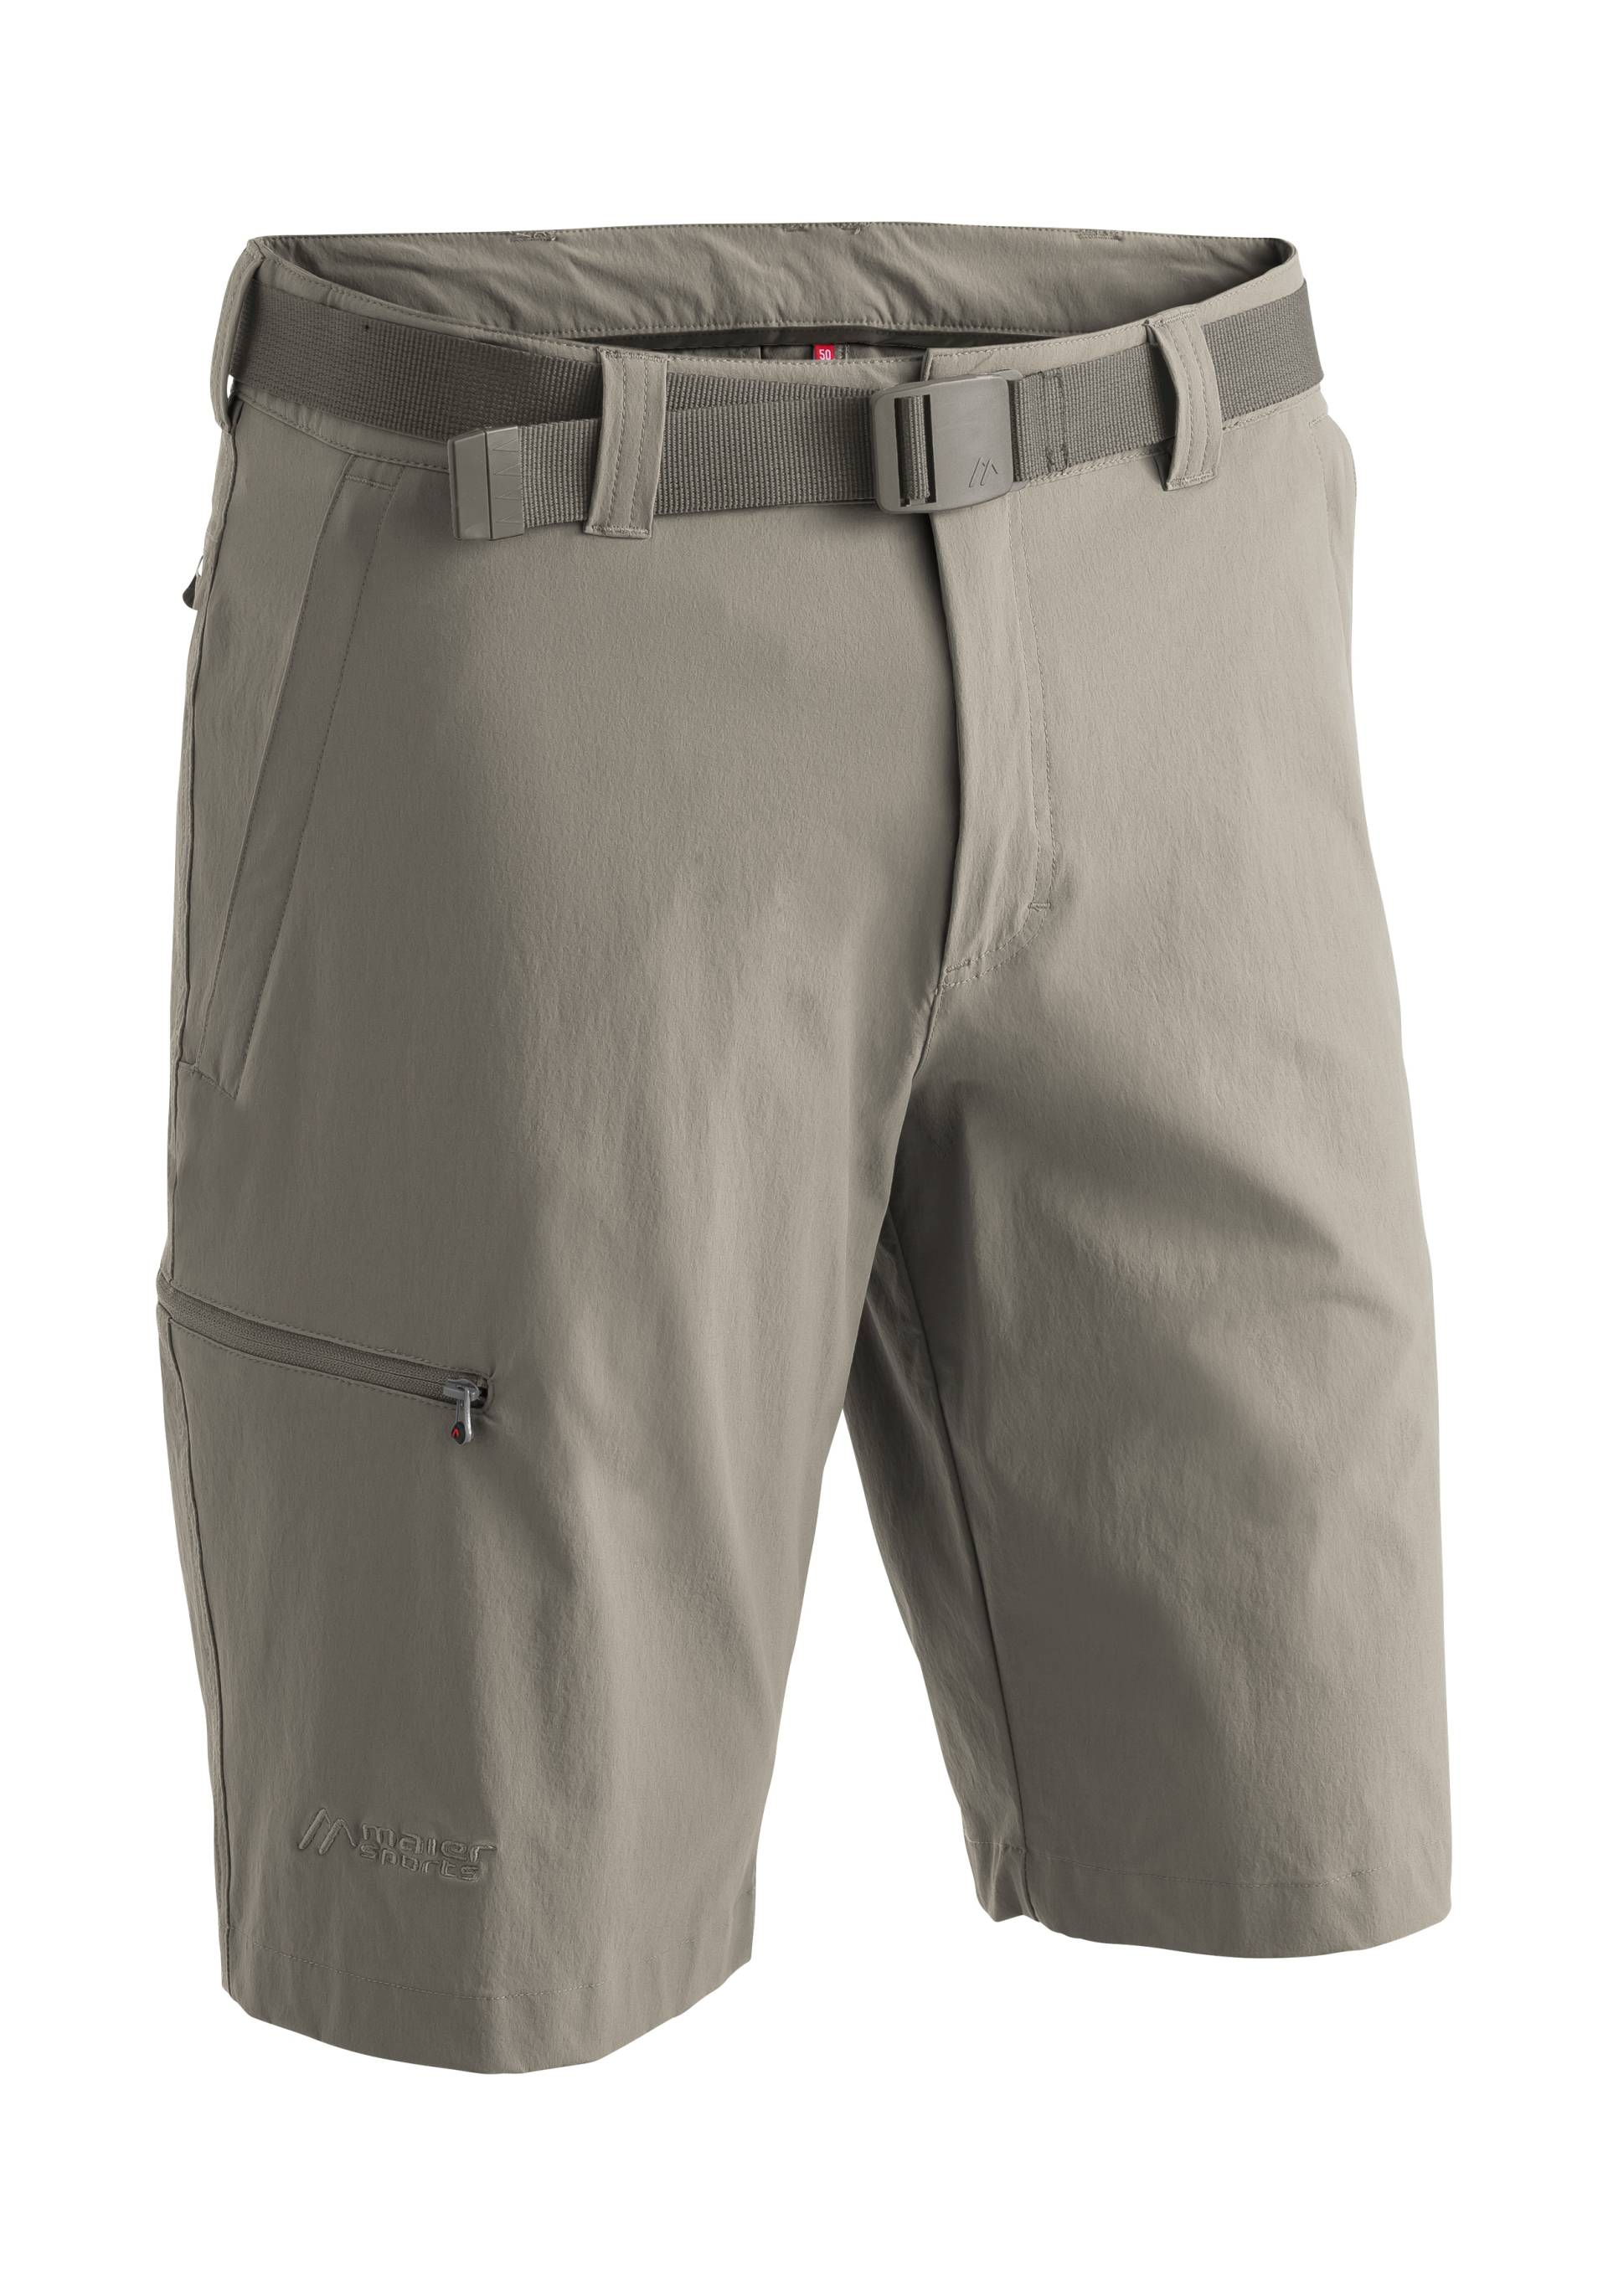 Maier Sports Funktionsshorts »Huang« von maier sports